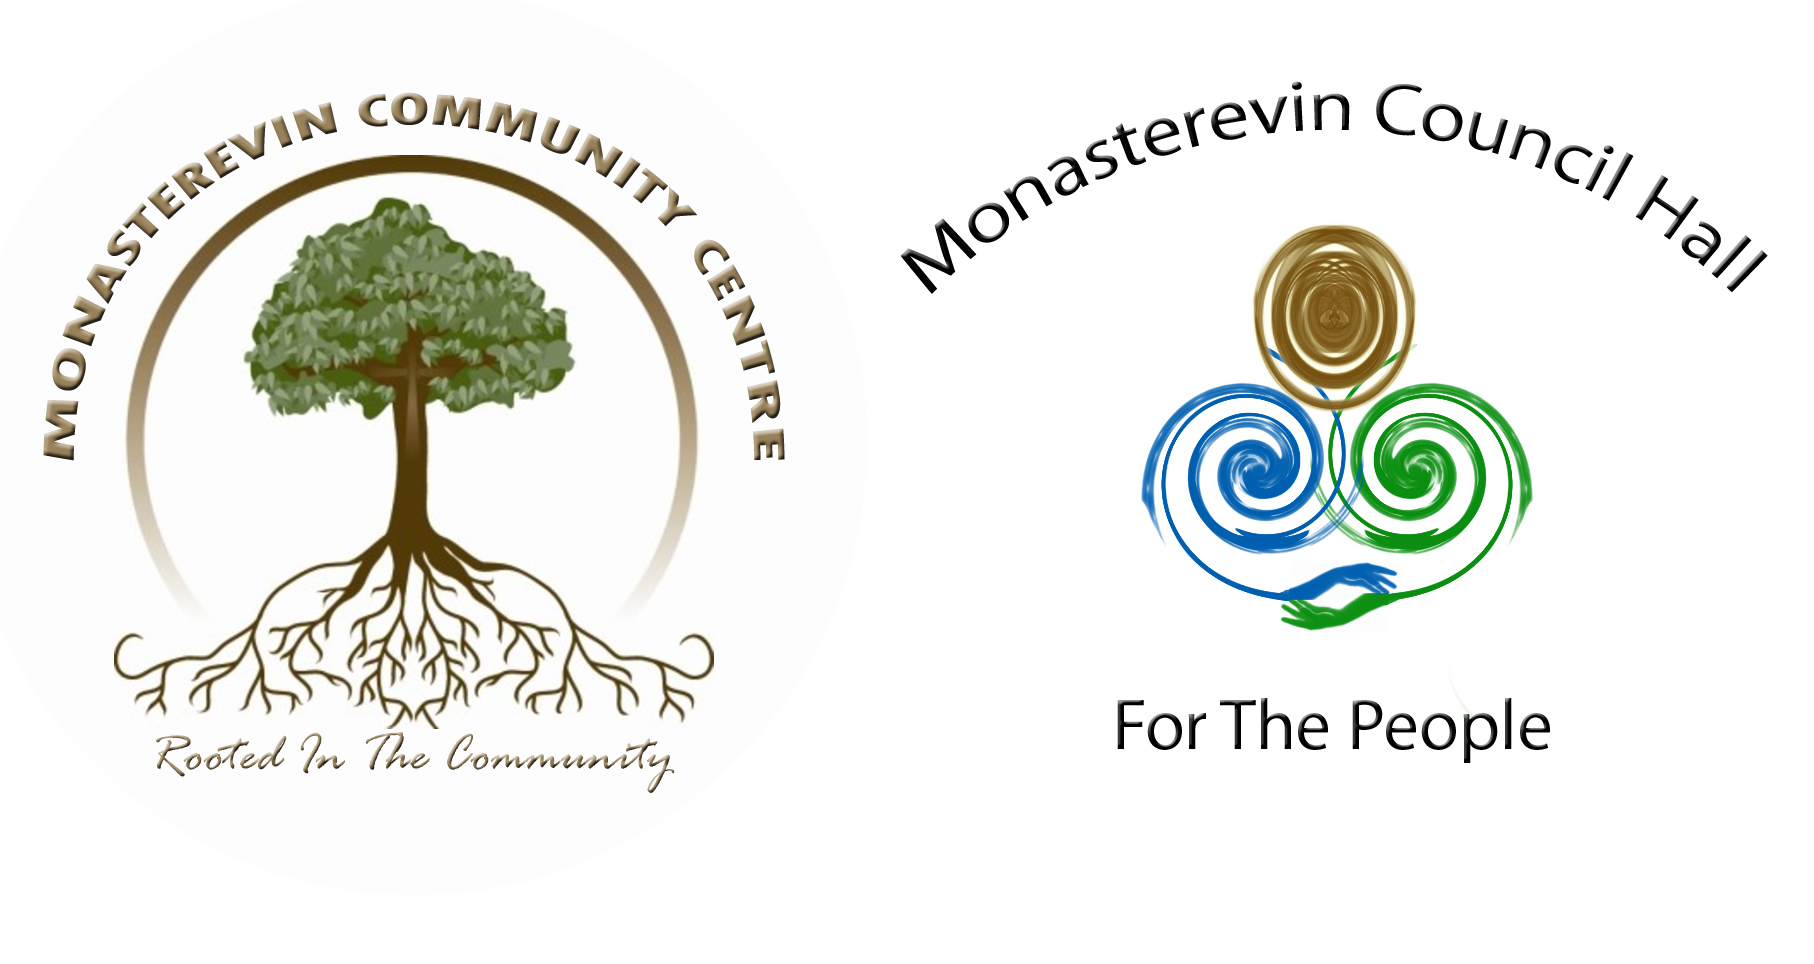 Welcome to Monasterevin Community Centre